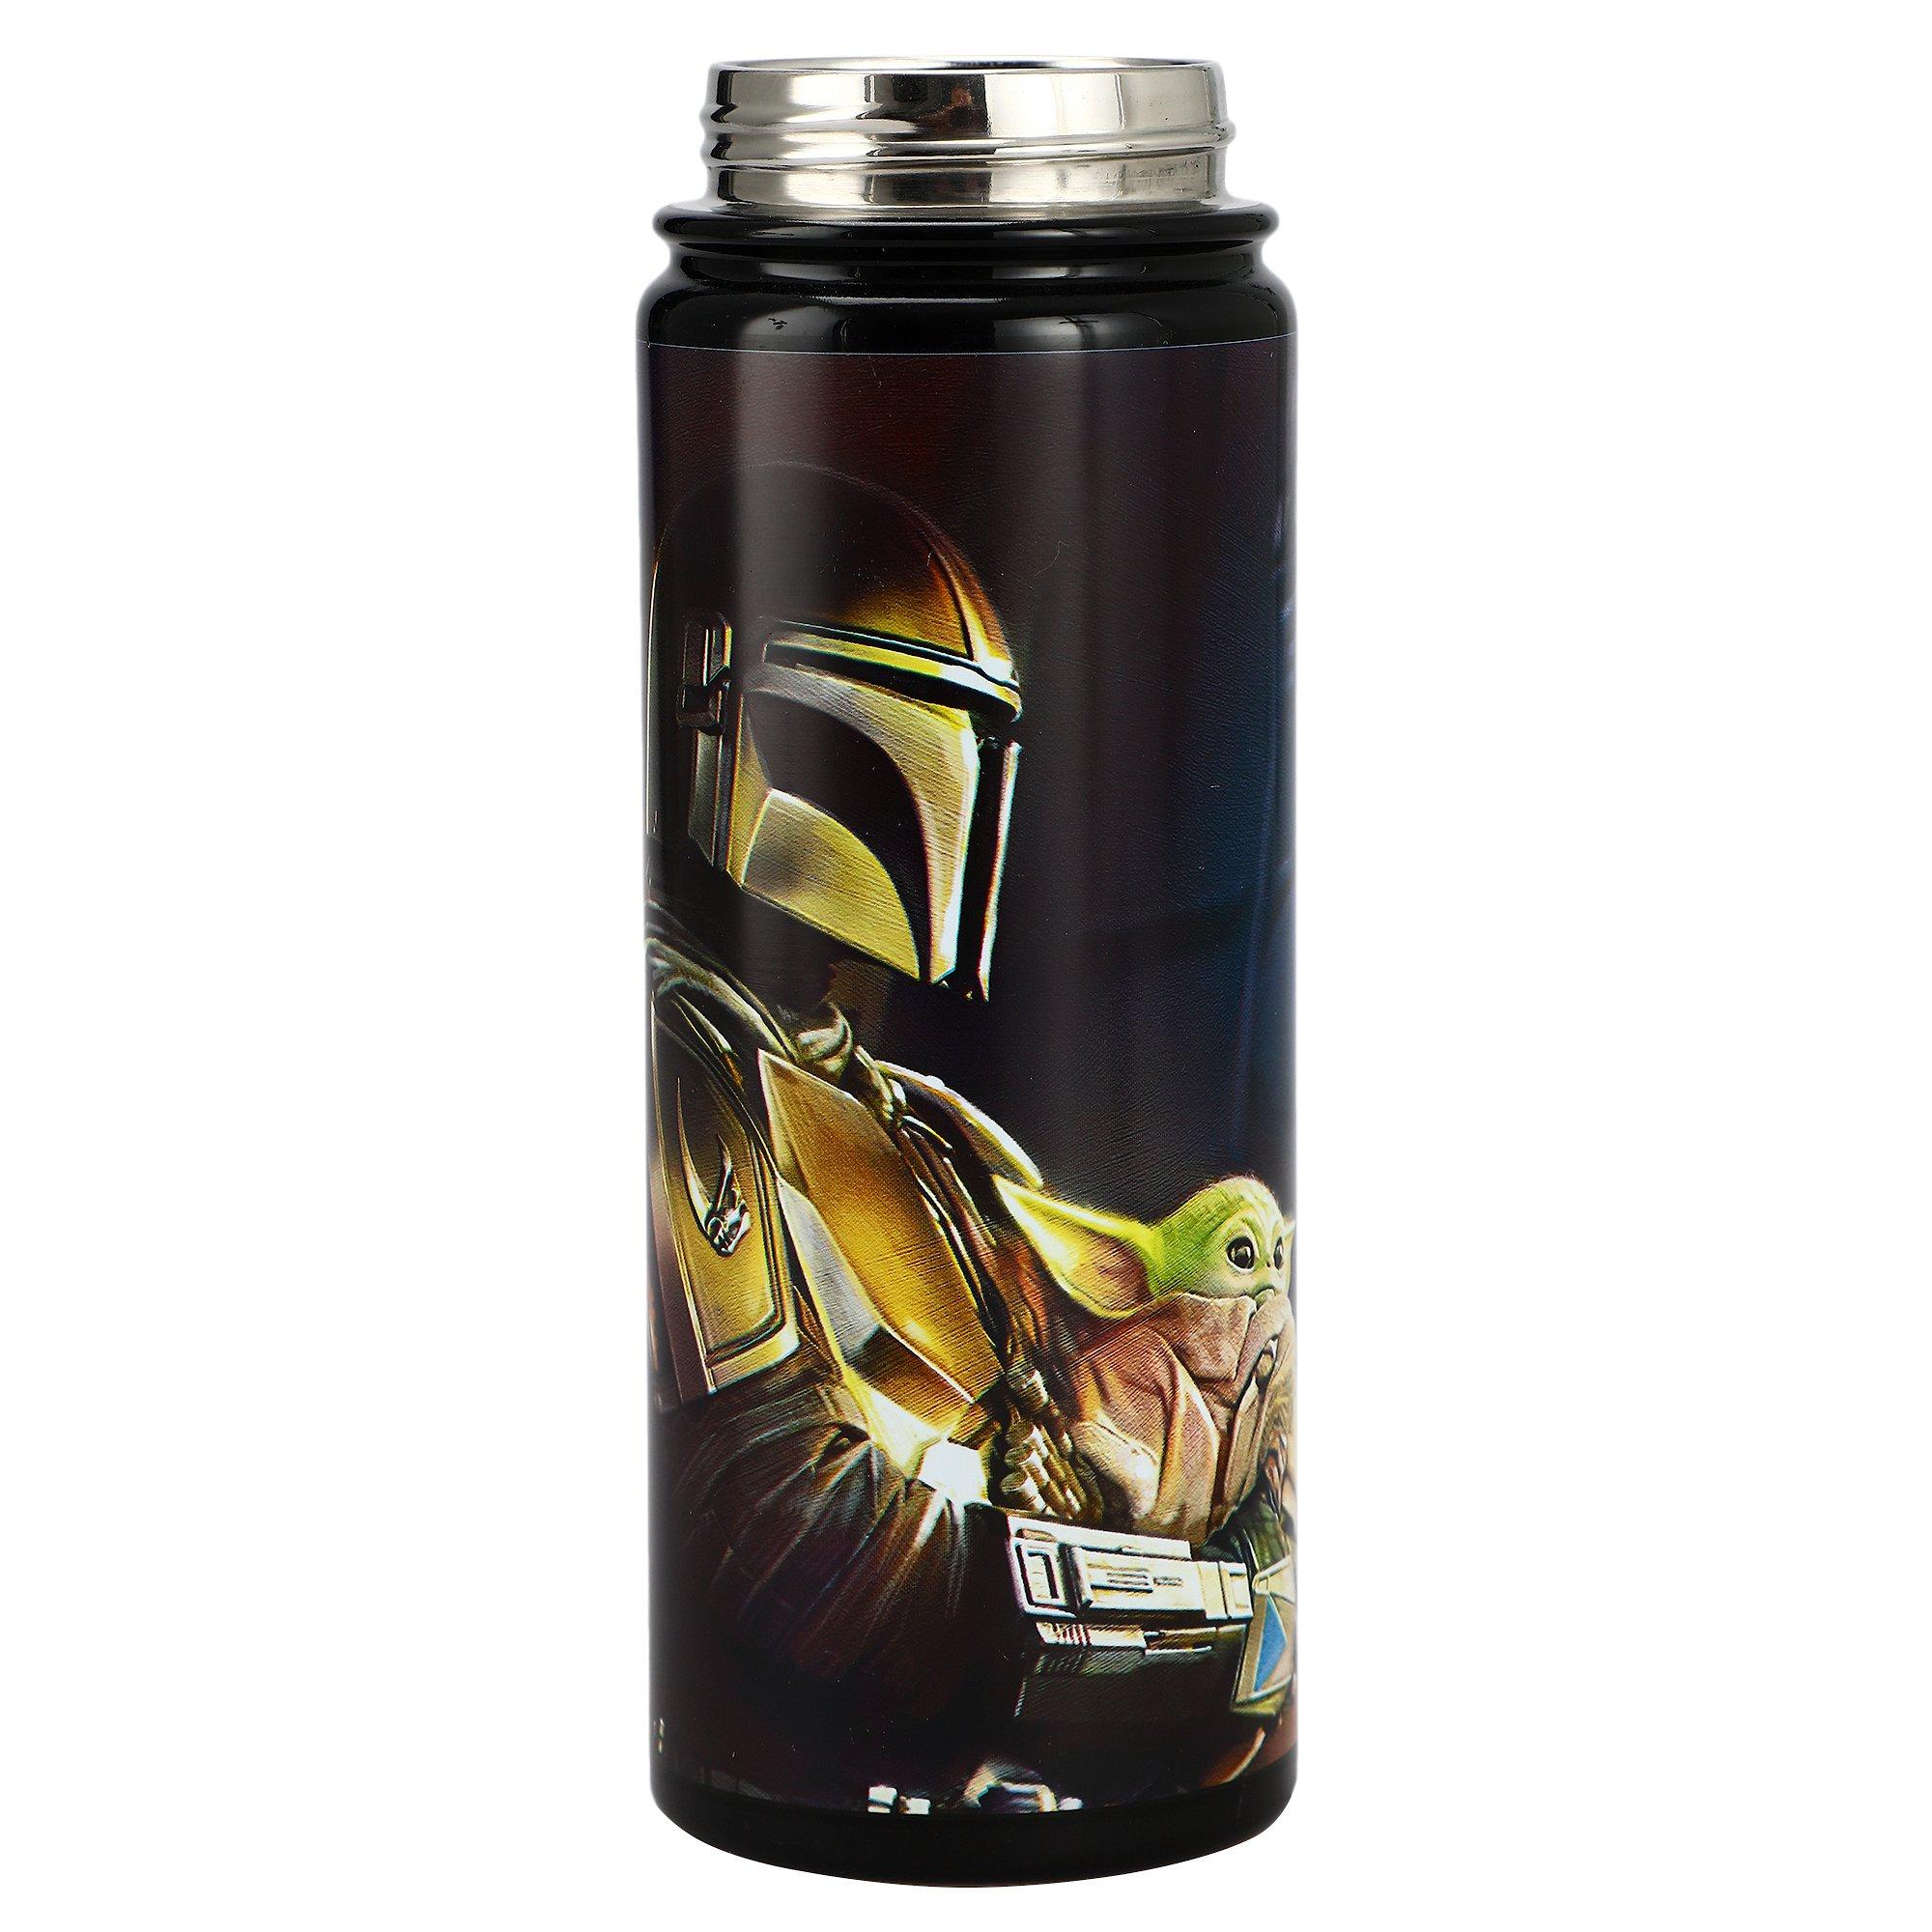 Star Wars The Mandalorian Bottled Water - Naturally Filtered Spring Water in 12 fl Ounce Reusable Aluminum Bottles, Recyclable and BPA-Free, Case